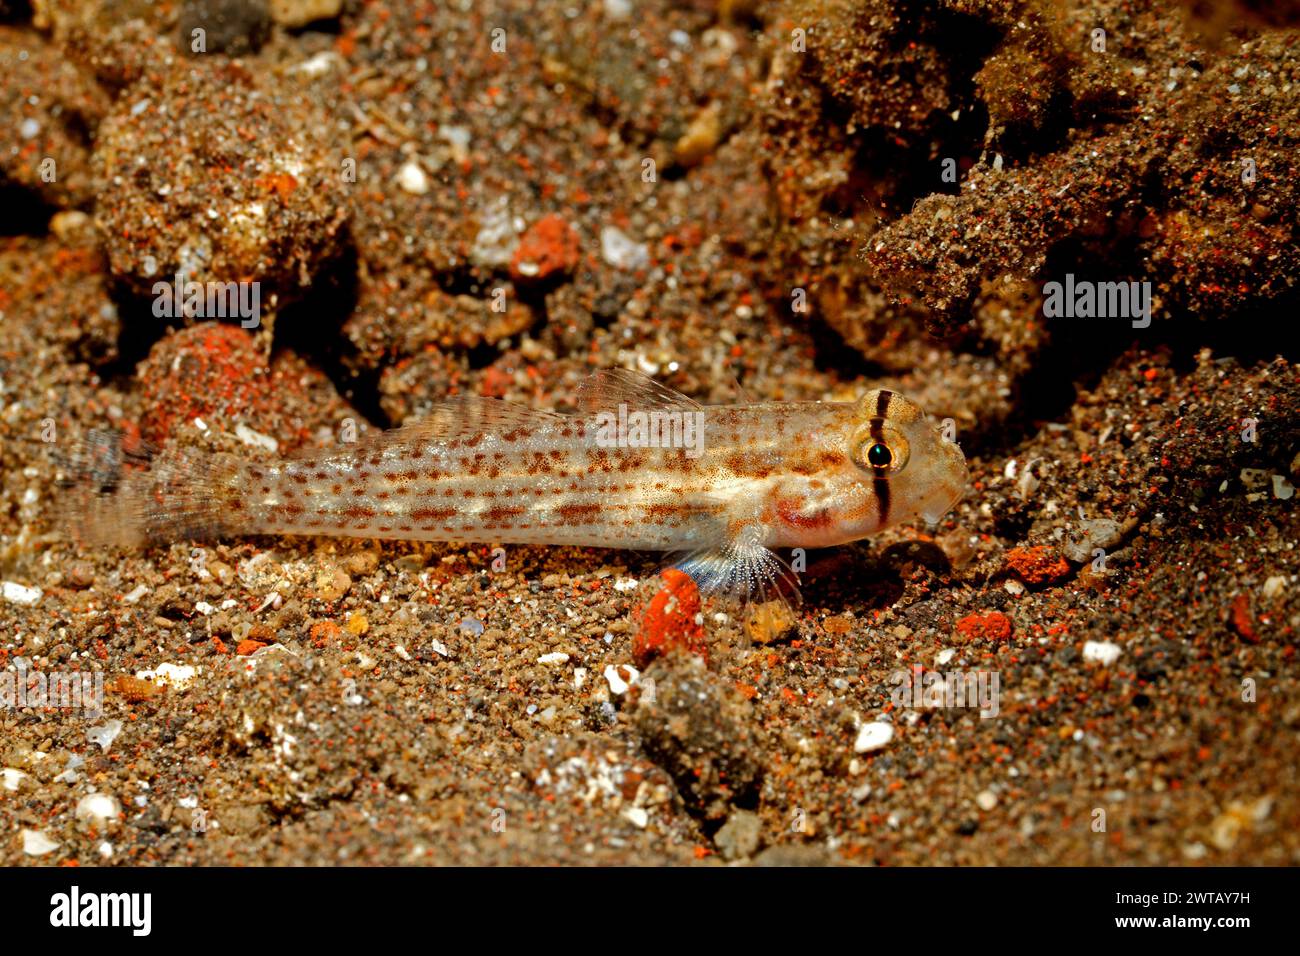 Eyebar Goby, Gnatholepis anjerensis. Possibly Gnatholepis cauerensis. Also known as a Shoulderspot Goby. Tulamben, Bali, Indonesia. Bali Sea Stock Photo